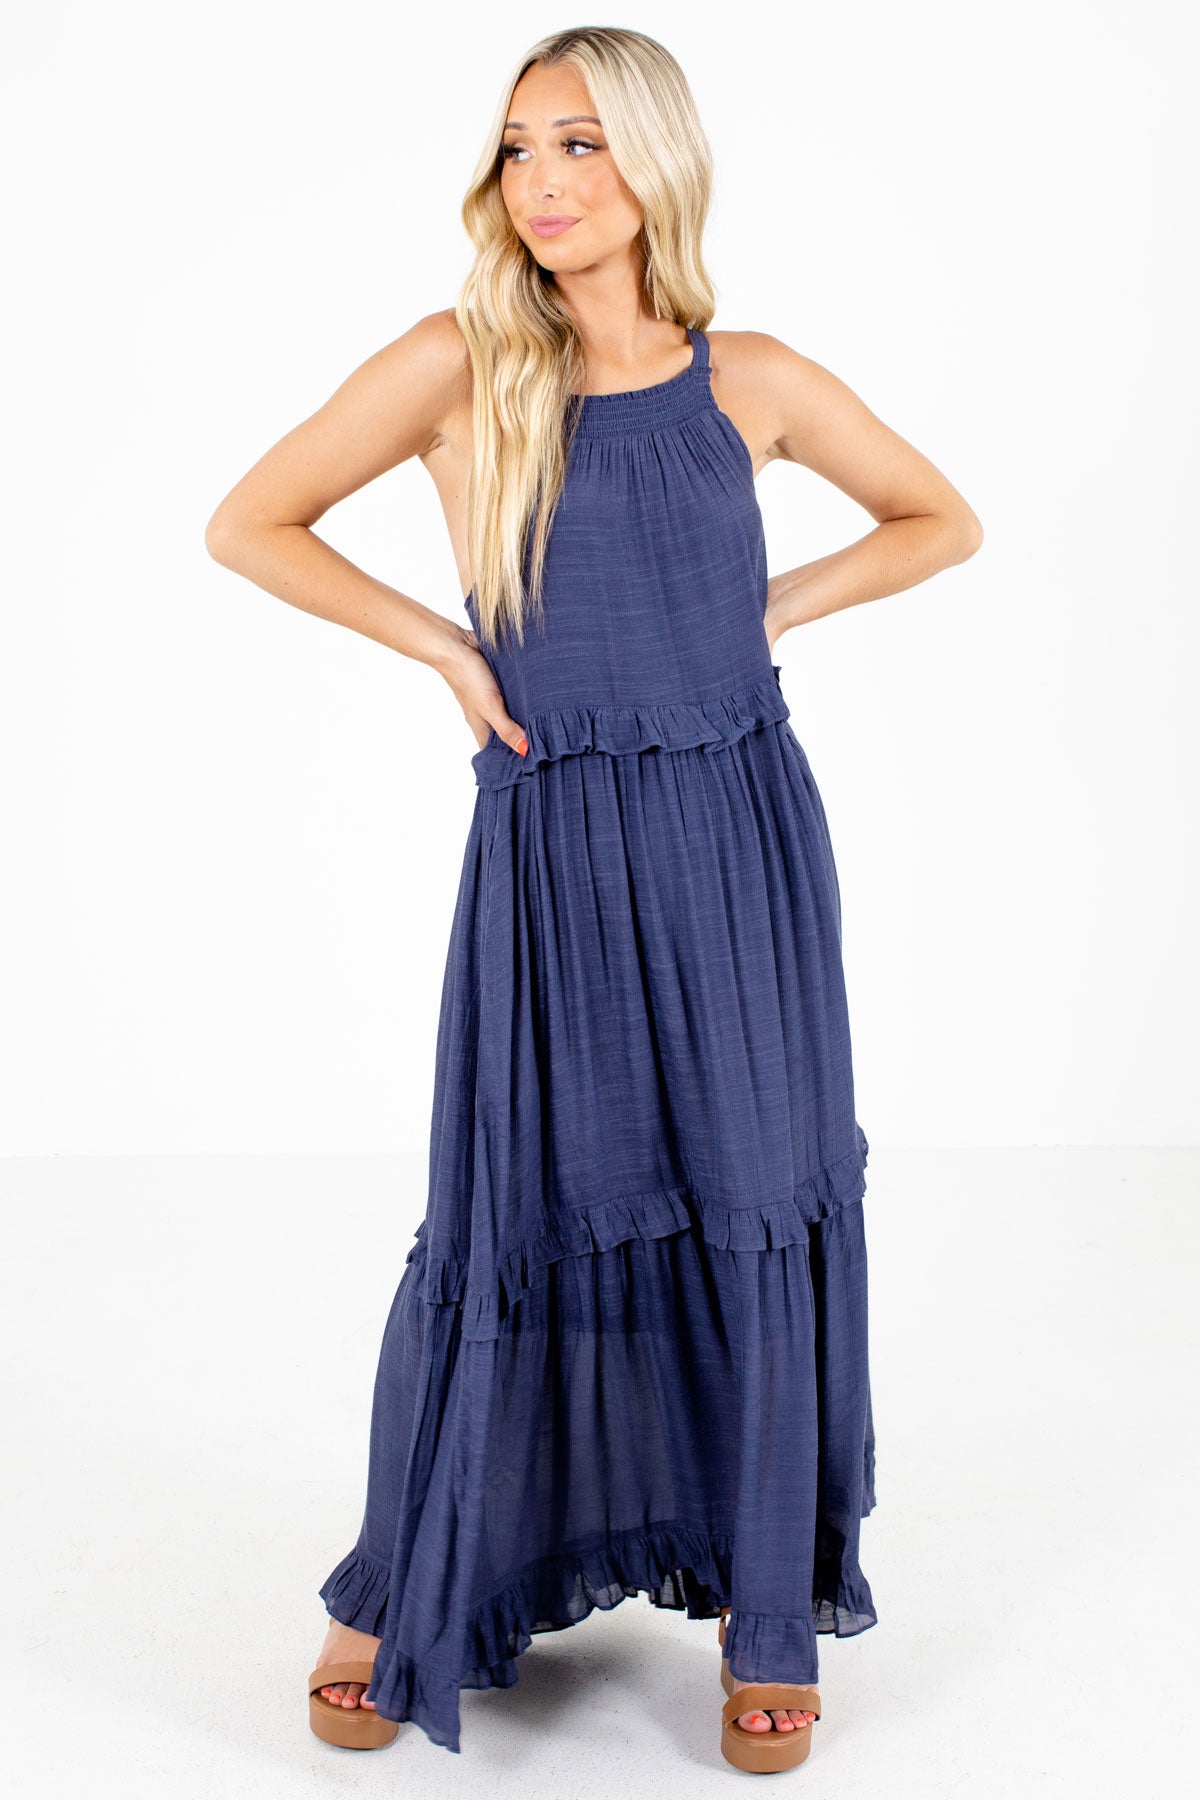 Women's Navy Spring and Summertime Boutique Clothing